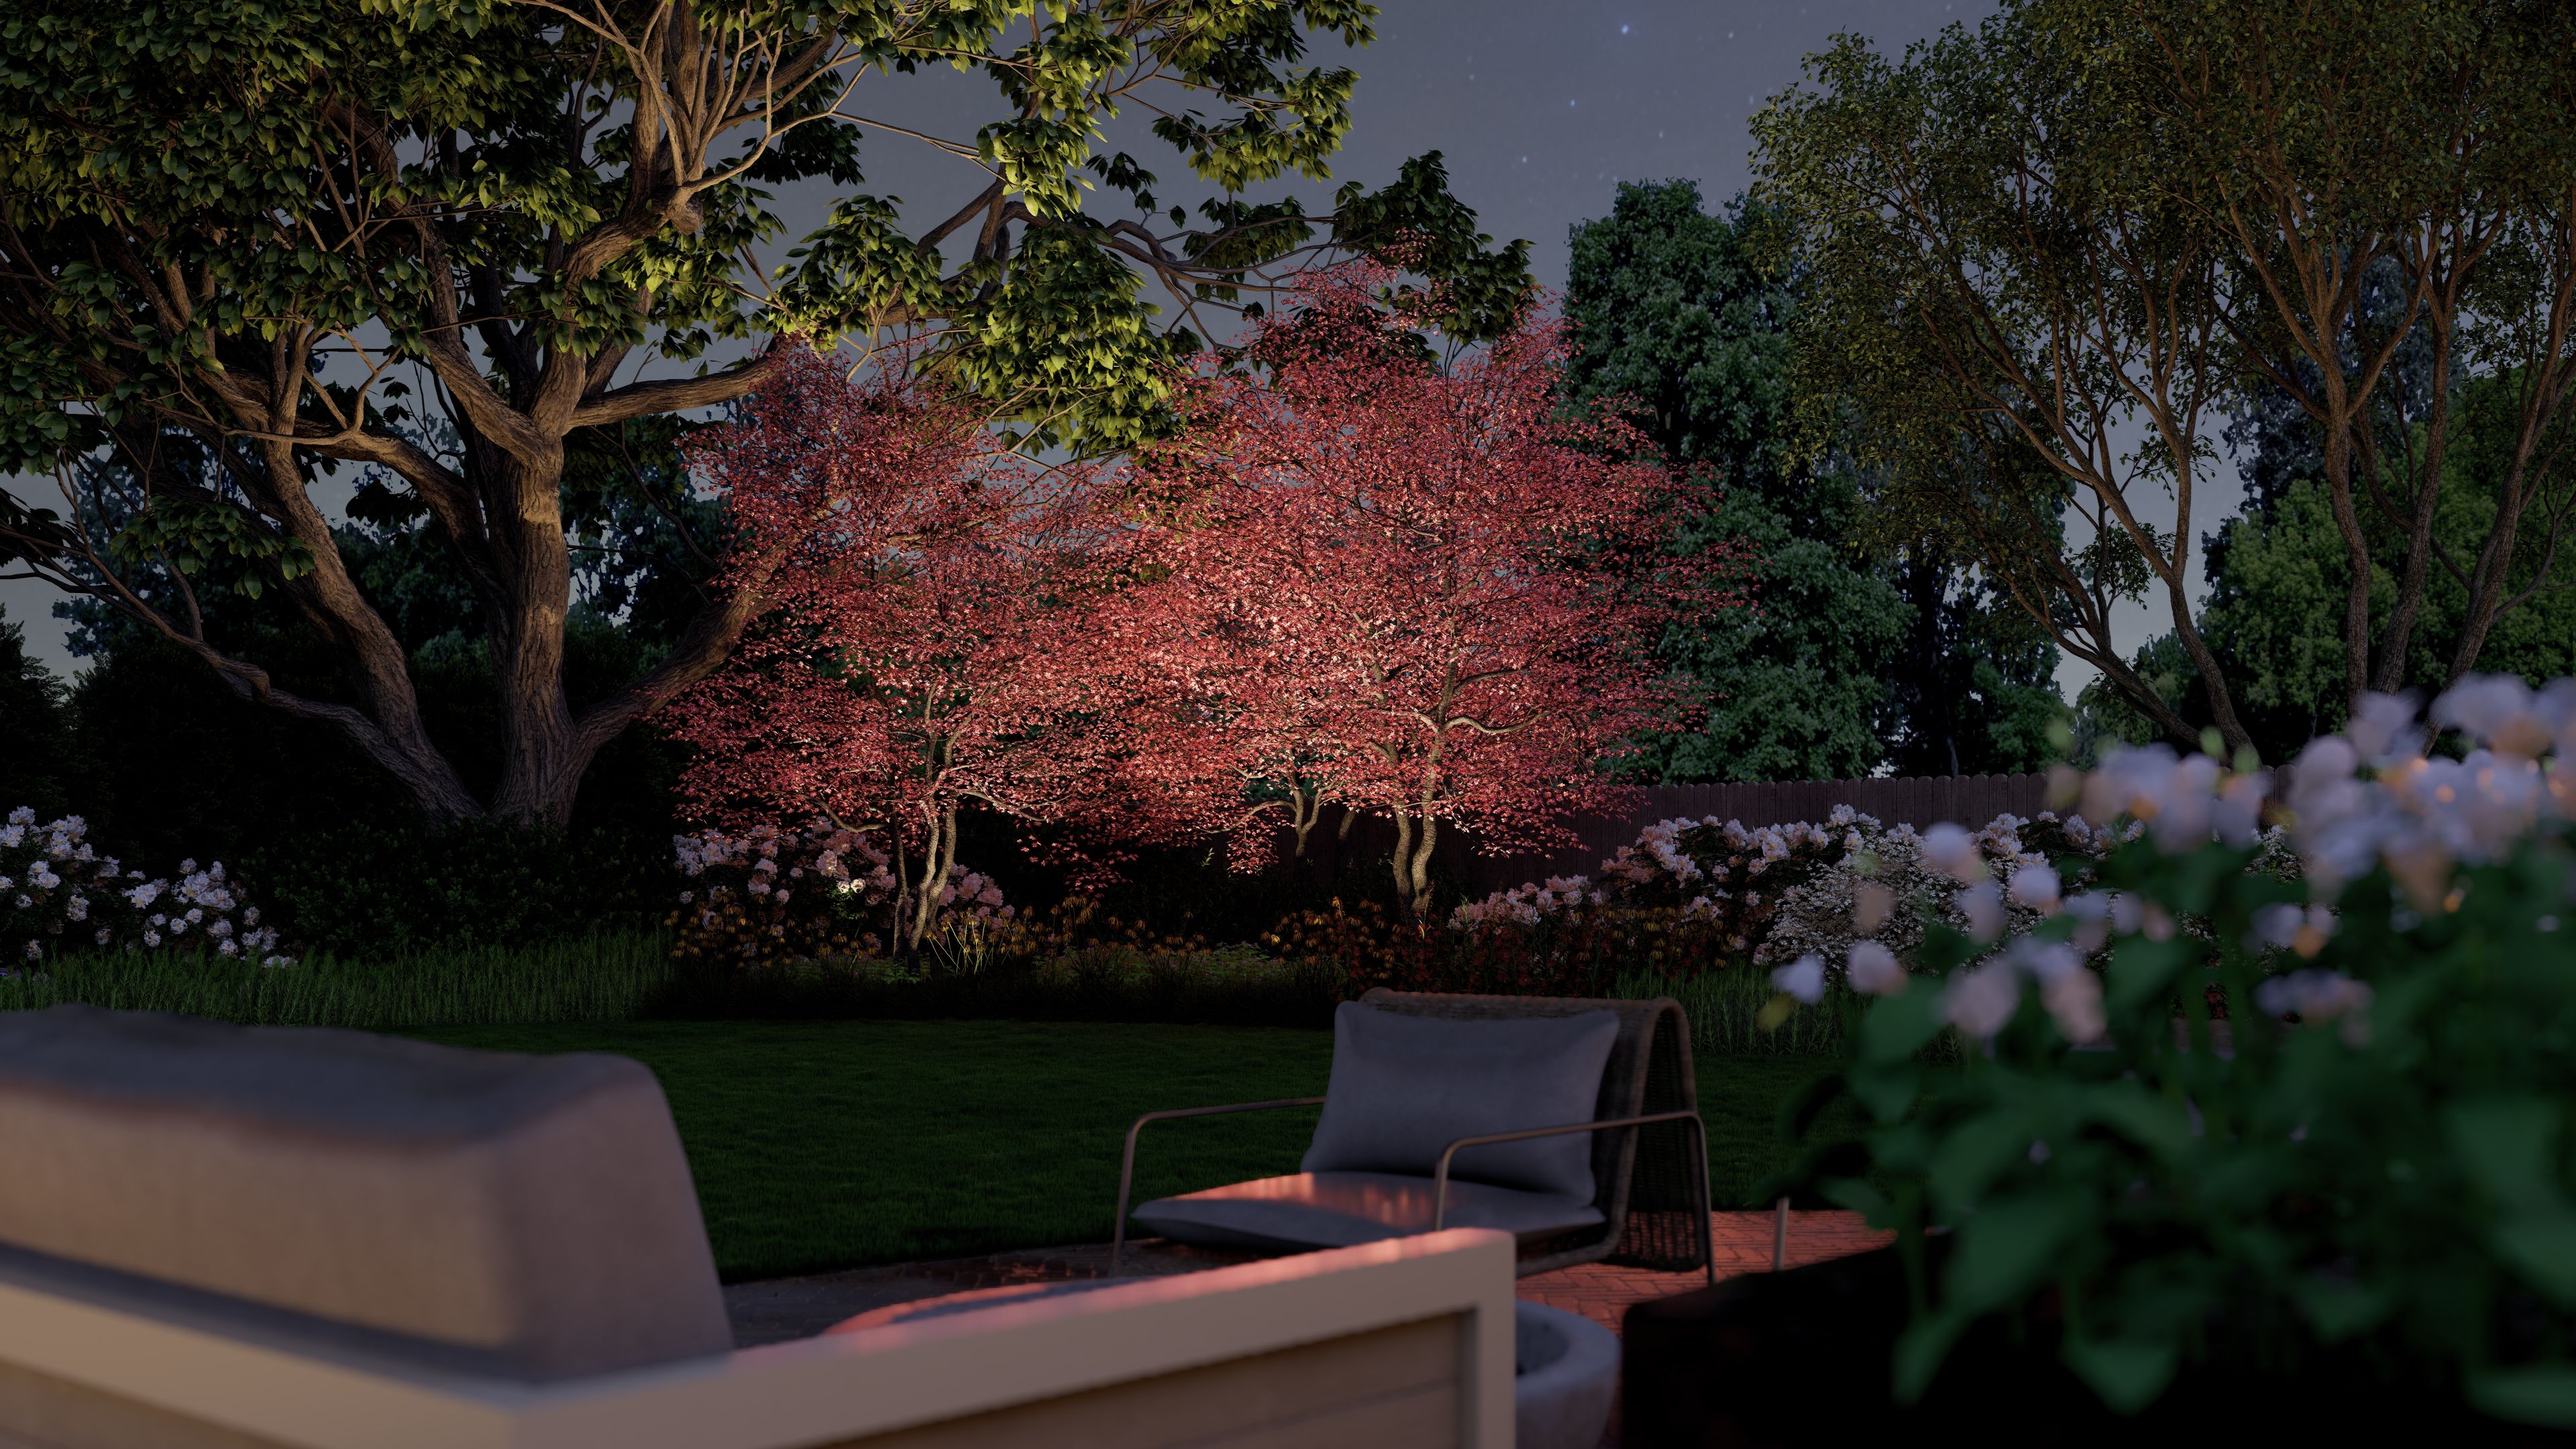 ambient lighting in an outdoor area in small backyards